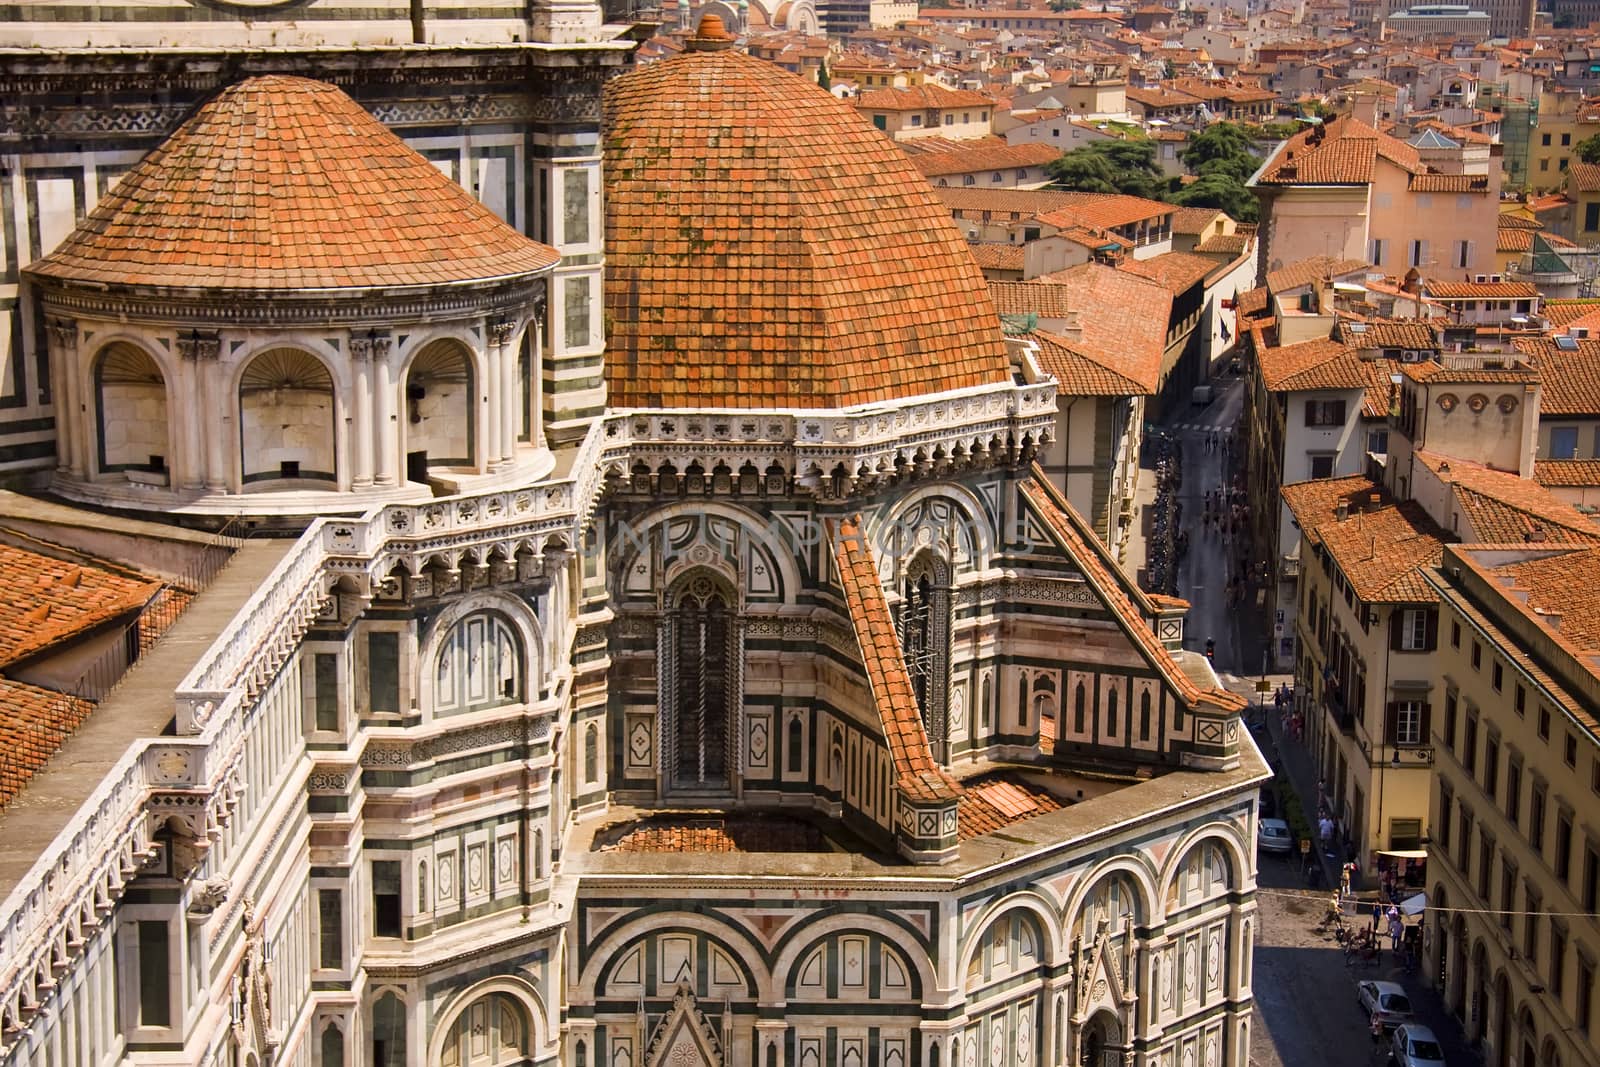 Florence view from Duomo Cathedral tower in Italy